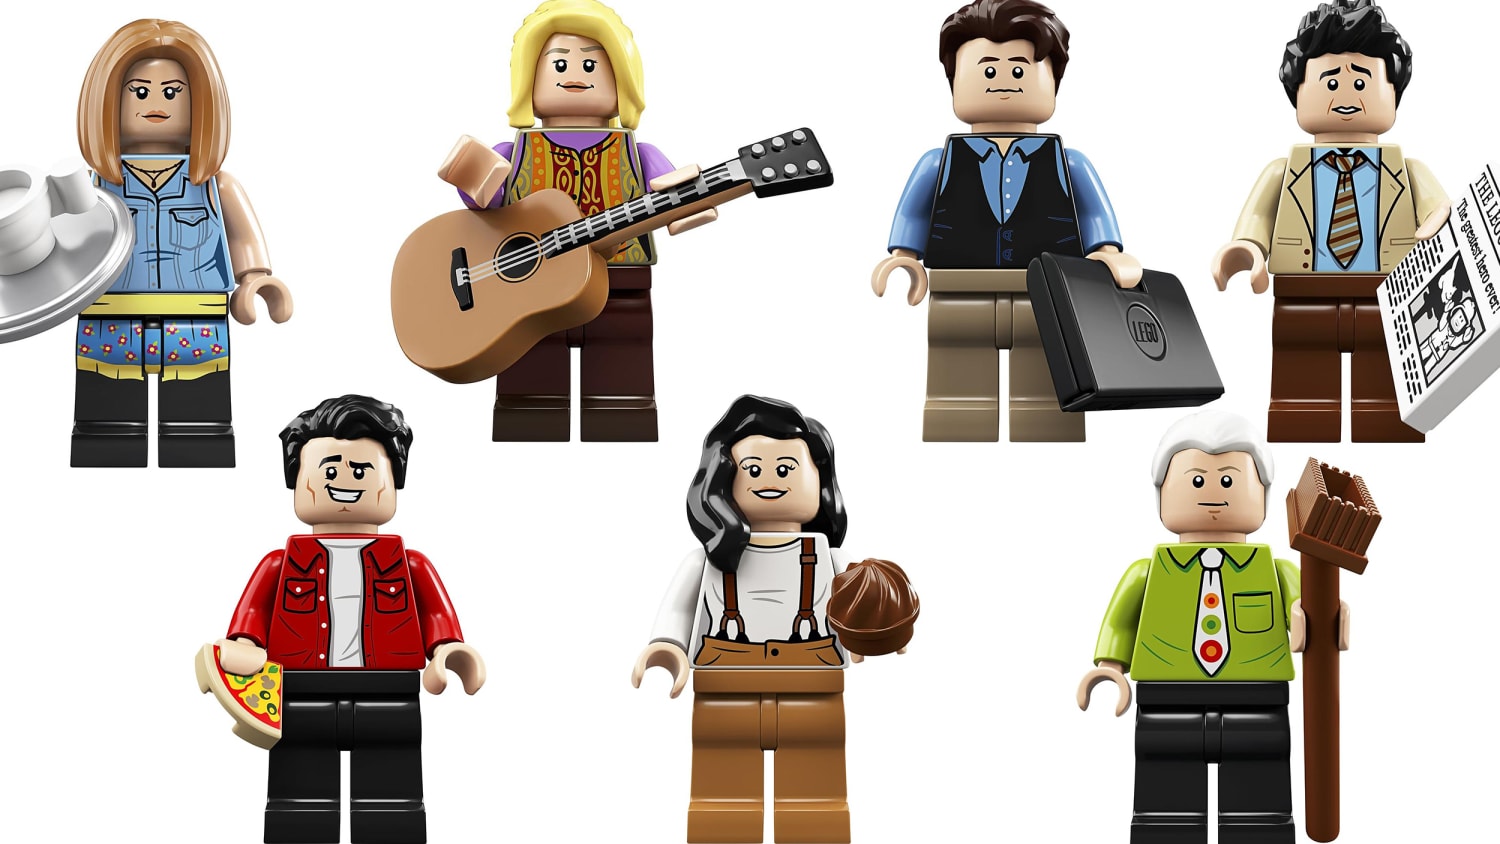 Utallige ligegyldighed gødning Friends' is getting its own Central Perk Lego set — and the details are  amazing